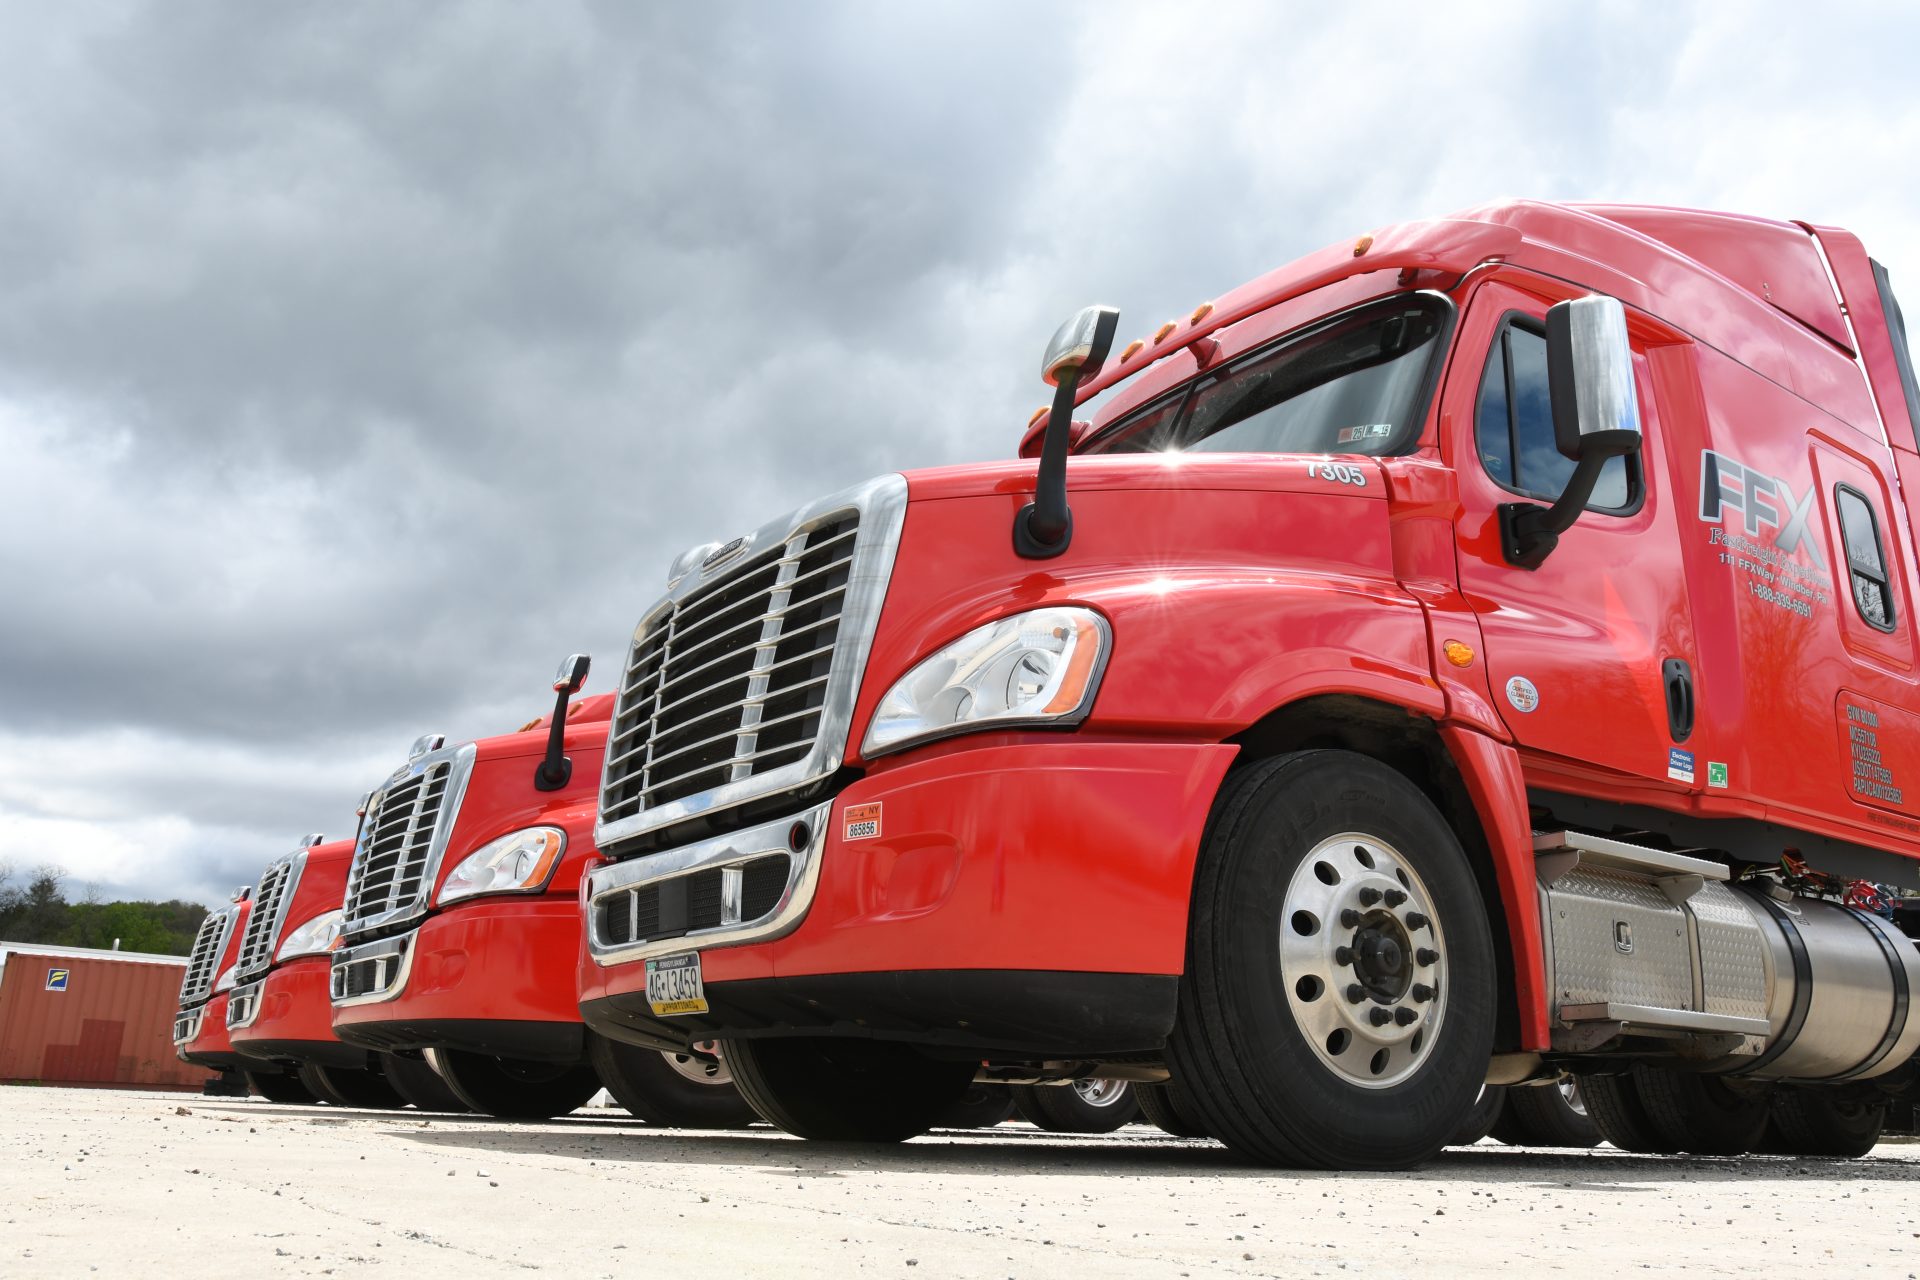 trucking companies that hire with preventable accidents